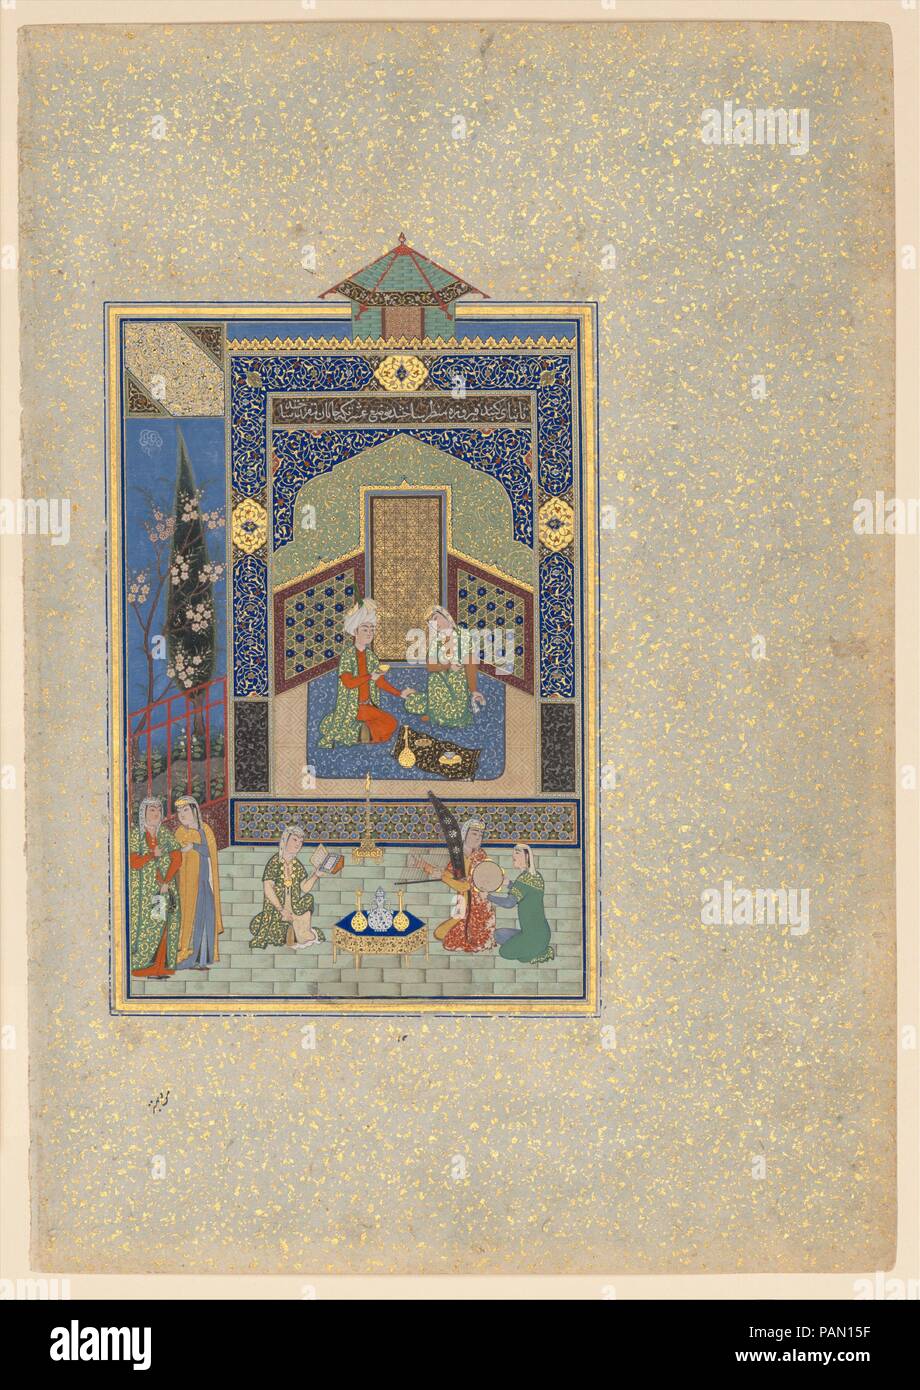 'Bahram Gur in the Turquoise Palace on Wednesday', Folio 216 from a Khamsa (Quintet) of Nizami. Artist: Painting by Shaikh Zada. Author: Nizami (Ilyas Abu Muhammad Nizam al-Din of Ganja) (probably 1141-1217). Calligrapher: Sultan Muhammad Nur (ca. 1472-ca. 1536); Mahmud Muzahhib. Dimensions: Painting: H. 7 7/8 in. (20 cm)   W.4 7/8 in. (12.4 cm)  Page: H. 12 11/16 in. (32.2 cm)  W. 8 3/4 in. (22.2 cm)  Mat: H. 19 1/4 in. (48.9 cm)   W. 14 1/4 in. (36.2 cm). Date: dated A.H. 931/A.D. 1524-25.  The fourth of the late twelfth-century Persian poet Nizami's five epic poems, later combined to form t Stock Photo